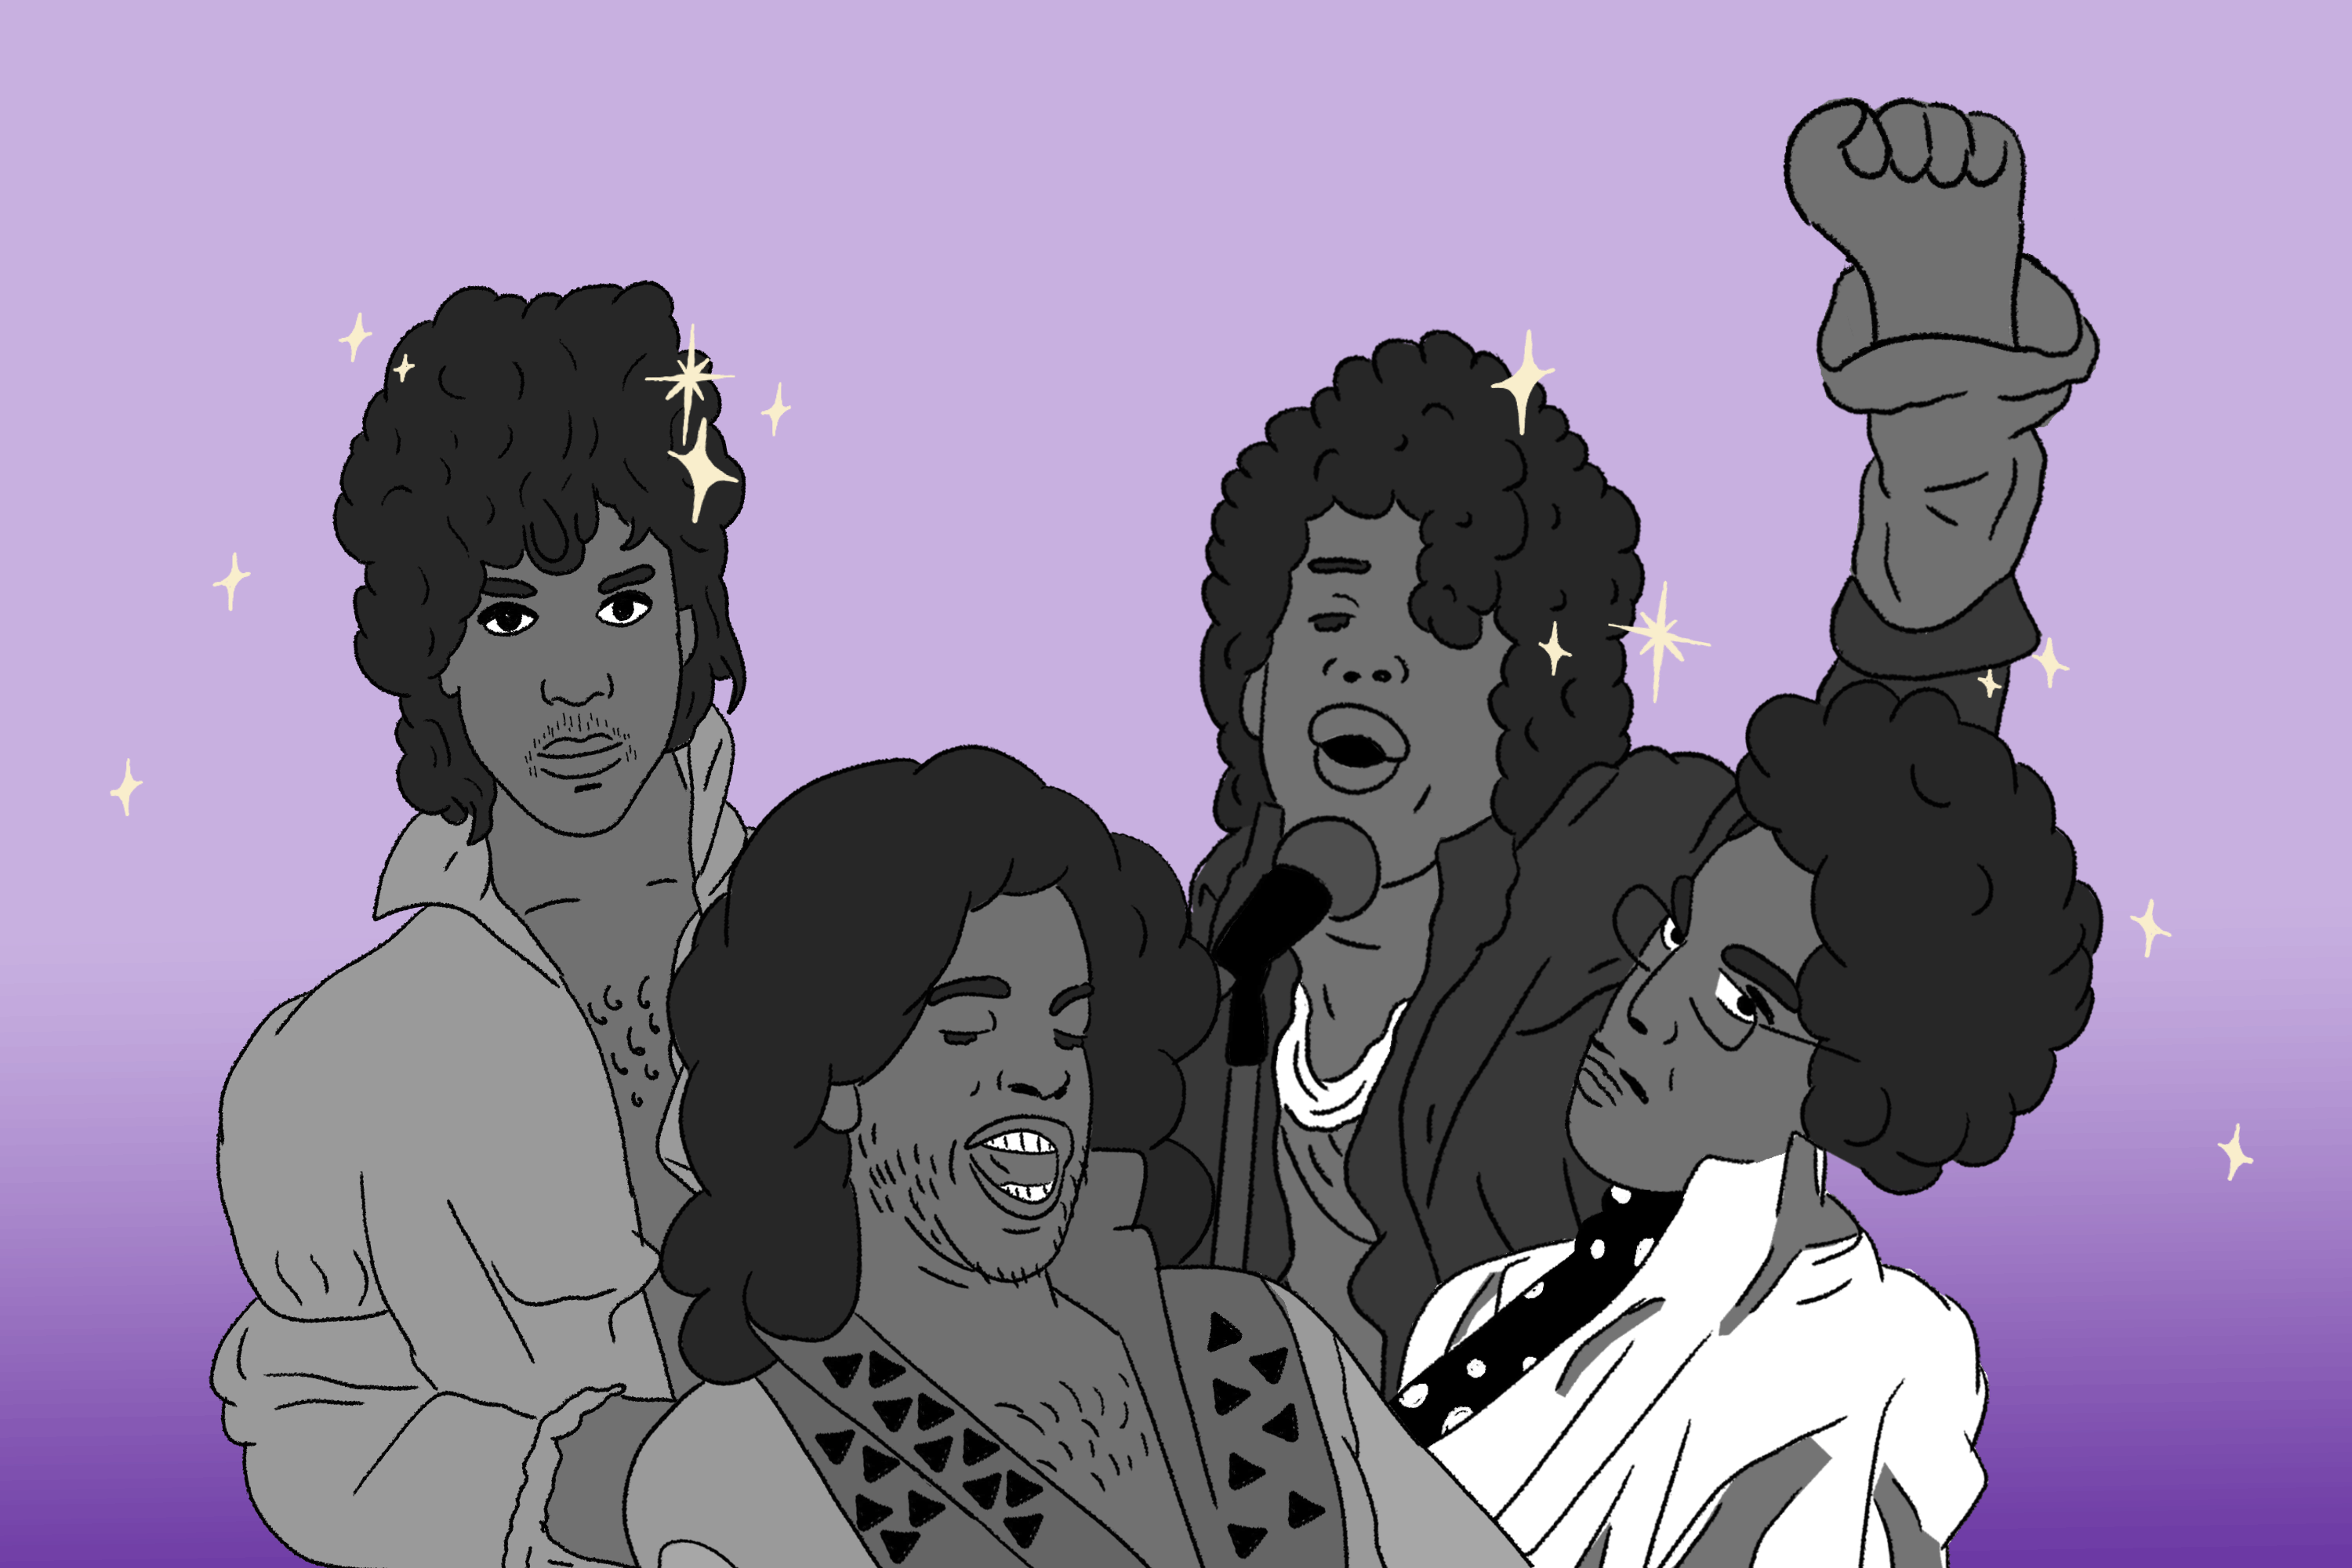 An illustration of Prince throughout the years.